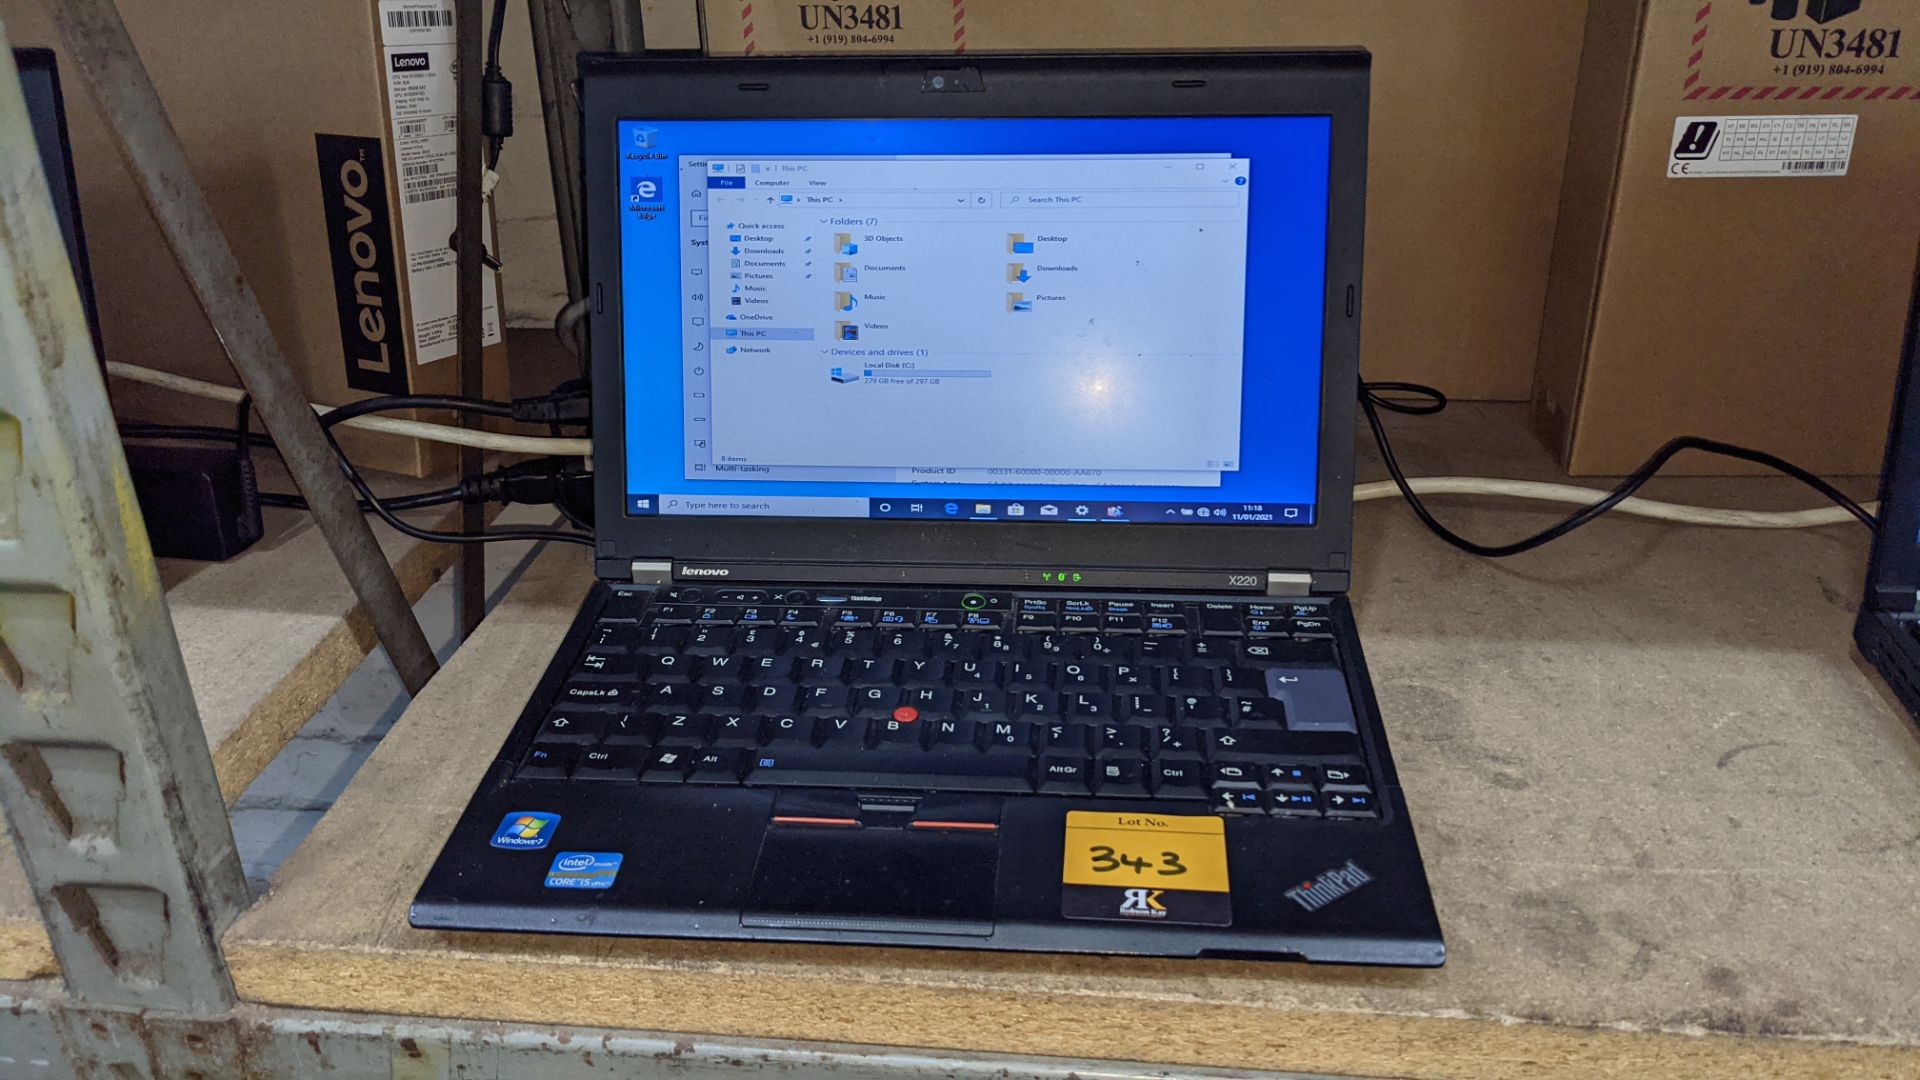 Lenovo X220 notebook computer with Intel Core i5-2520M CPU@2.5GHz, 4Gb RAM, 320Gb hard drive etc. in - Image 3 of 8